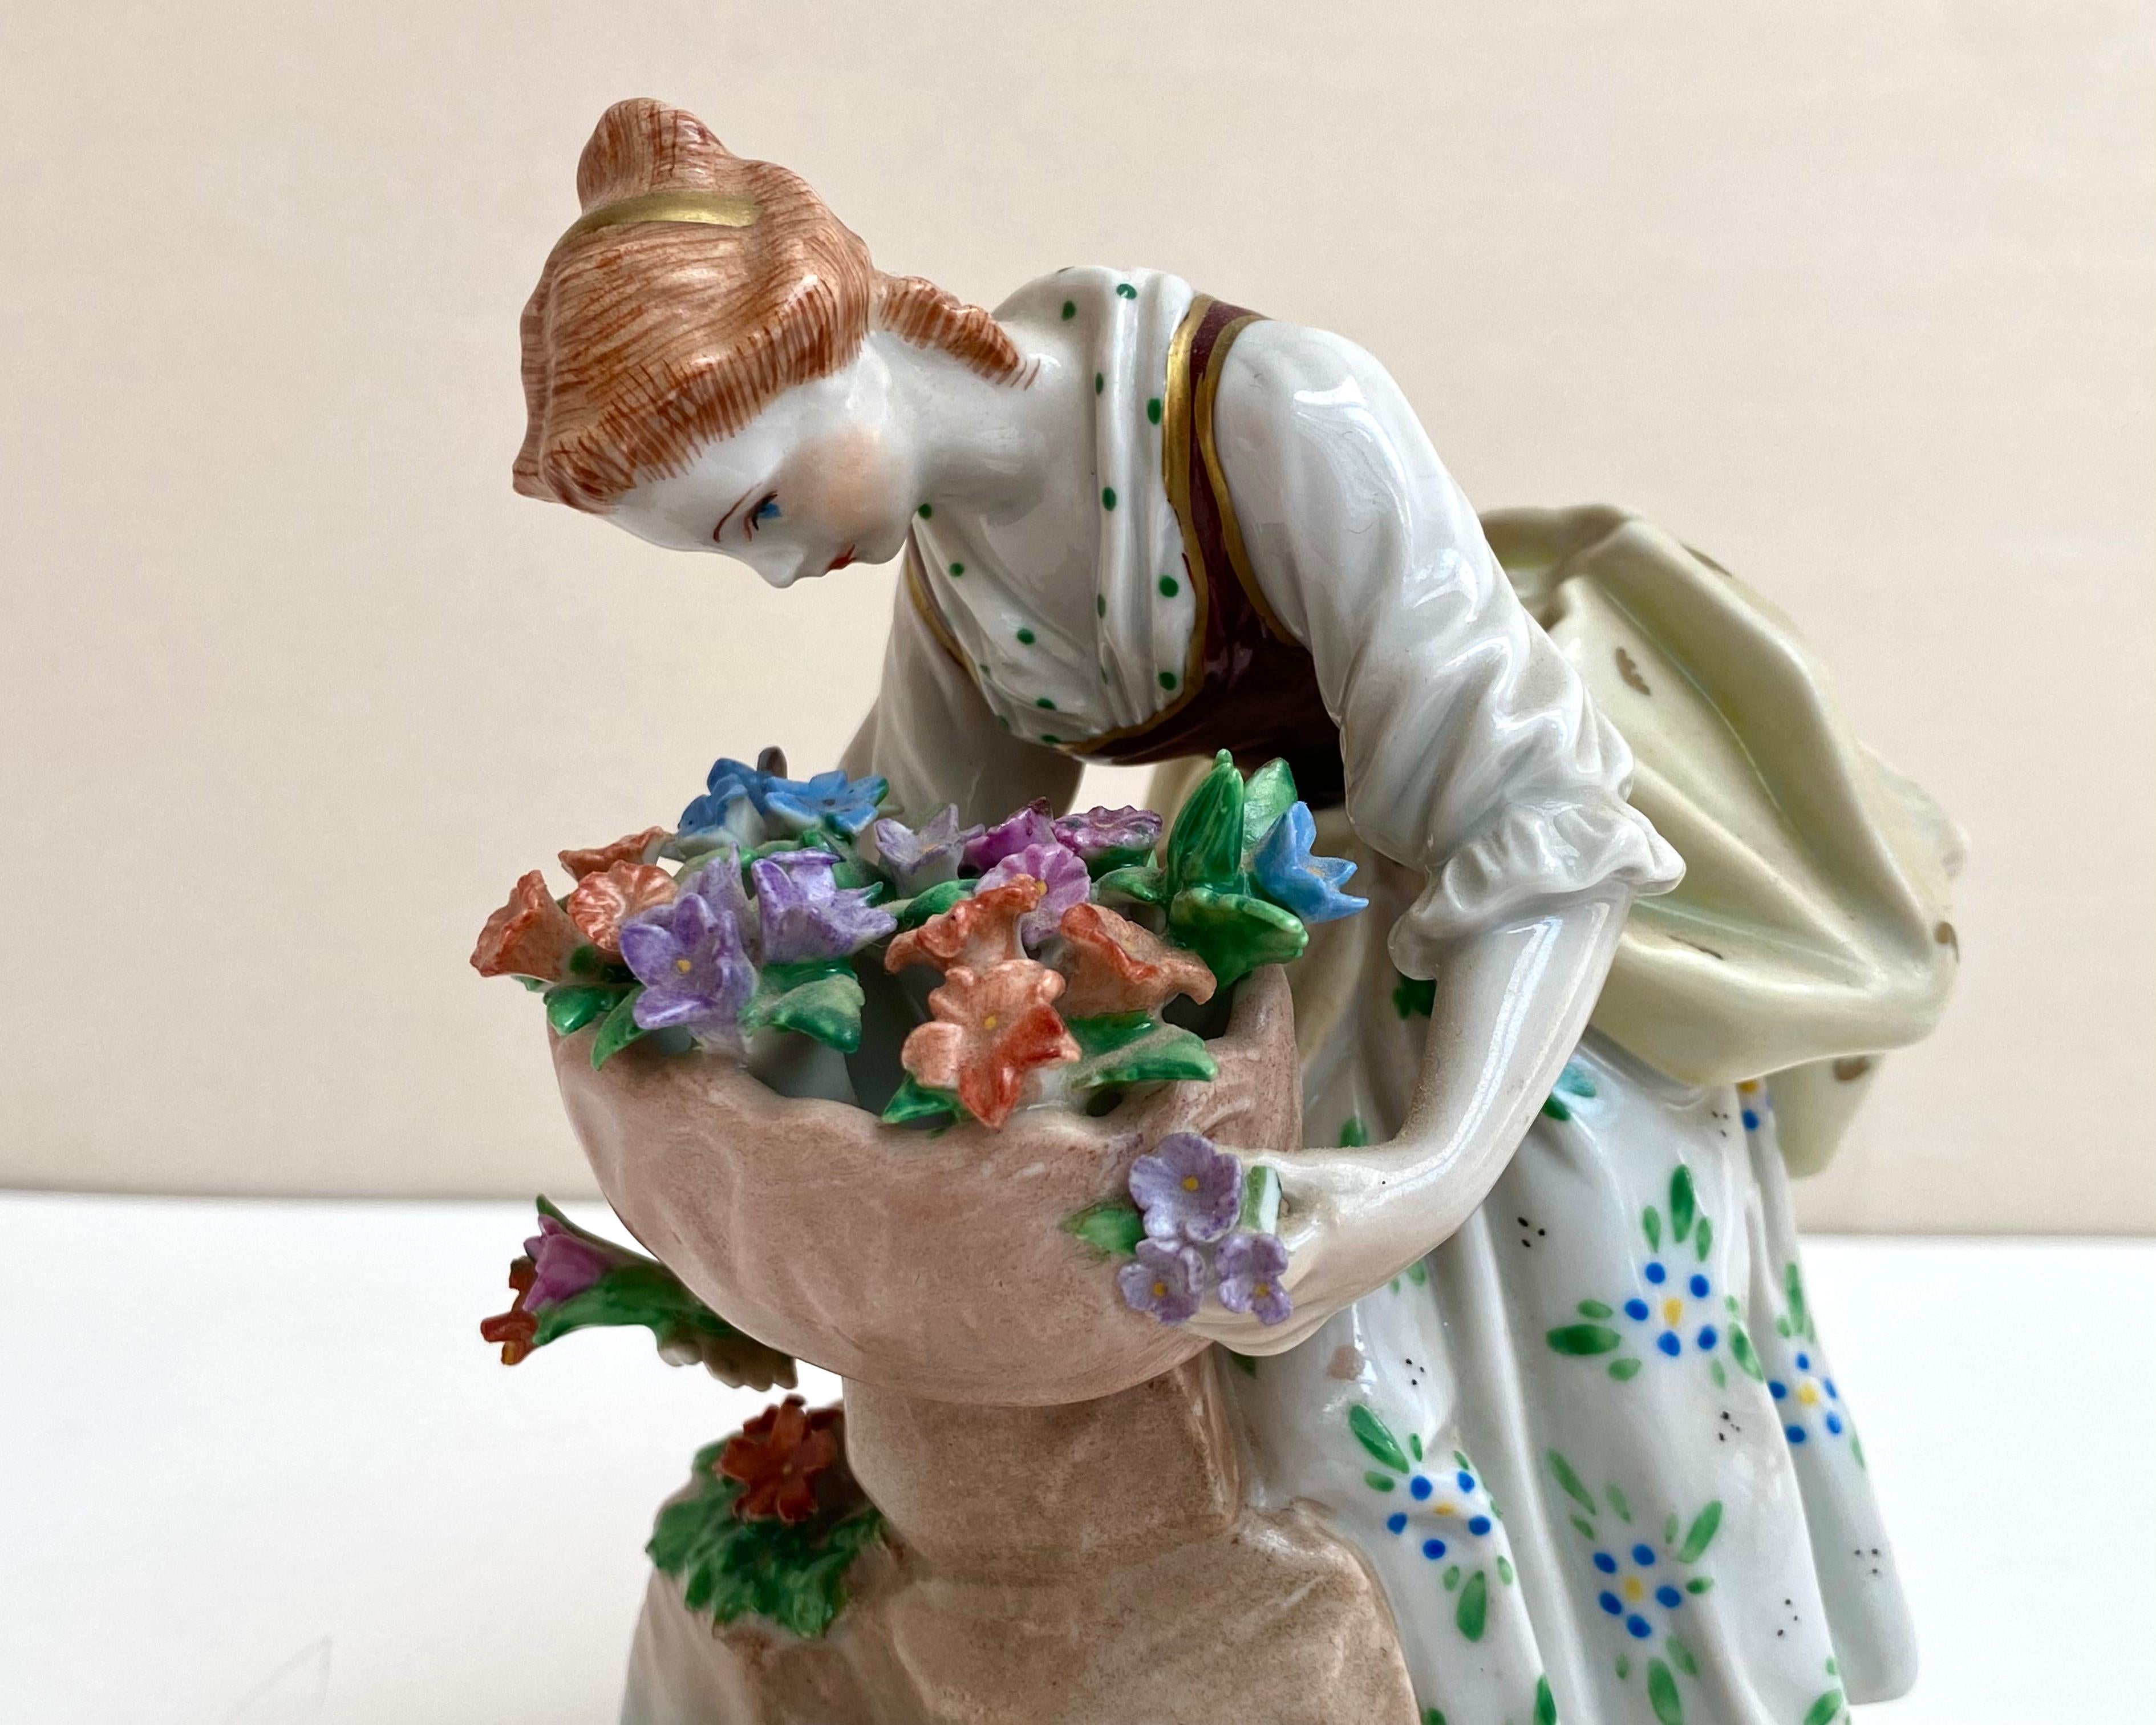 Ceramic Ornate Vintage Figurine Lady with Flowers, Dresden, Germany For Sale